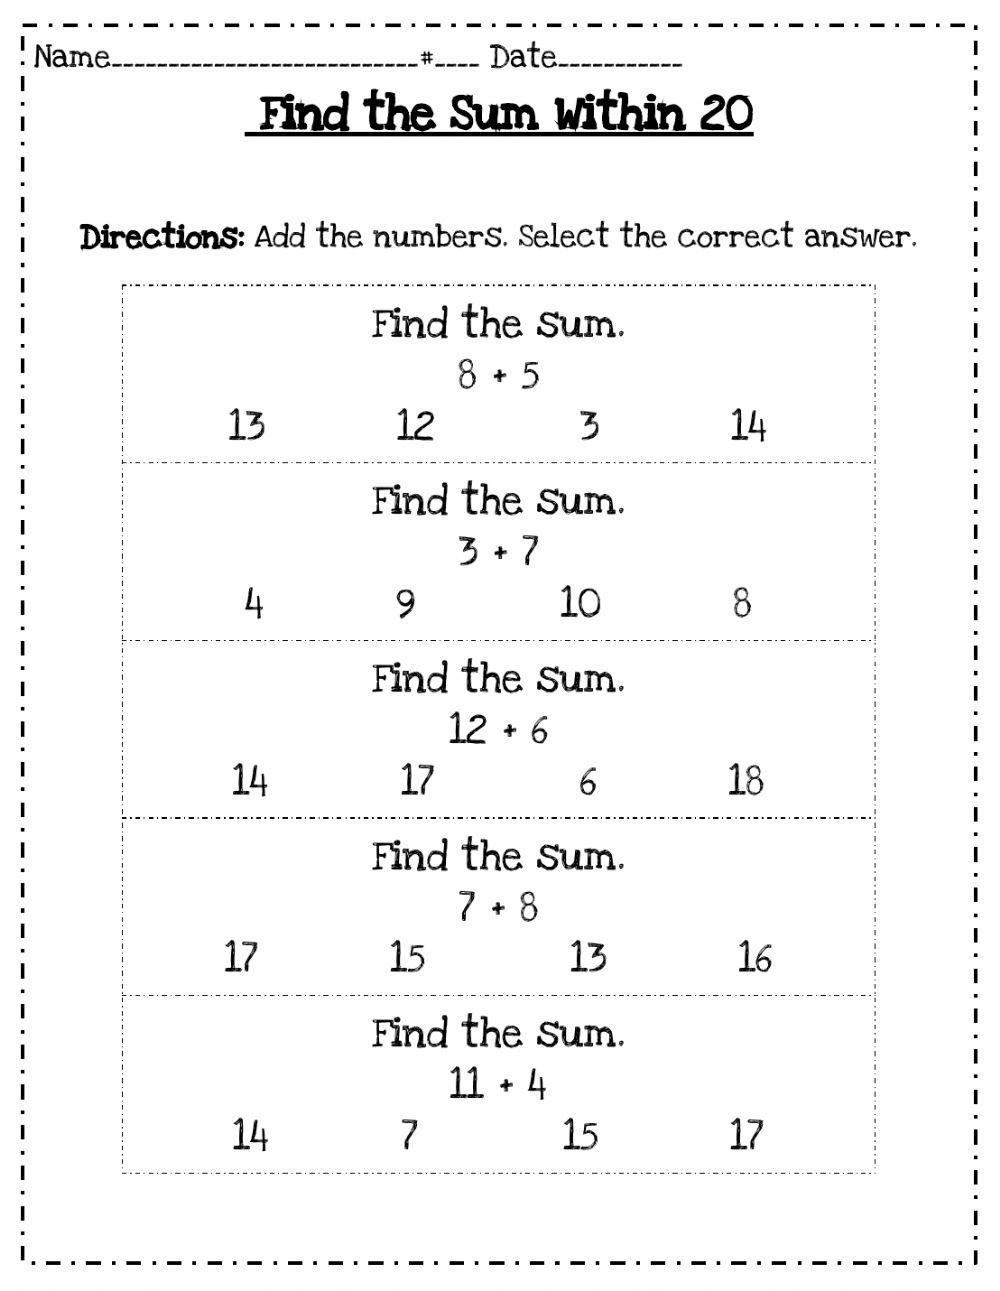 Find the Sum within 20